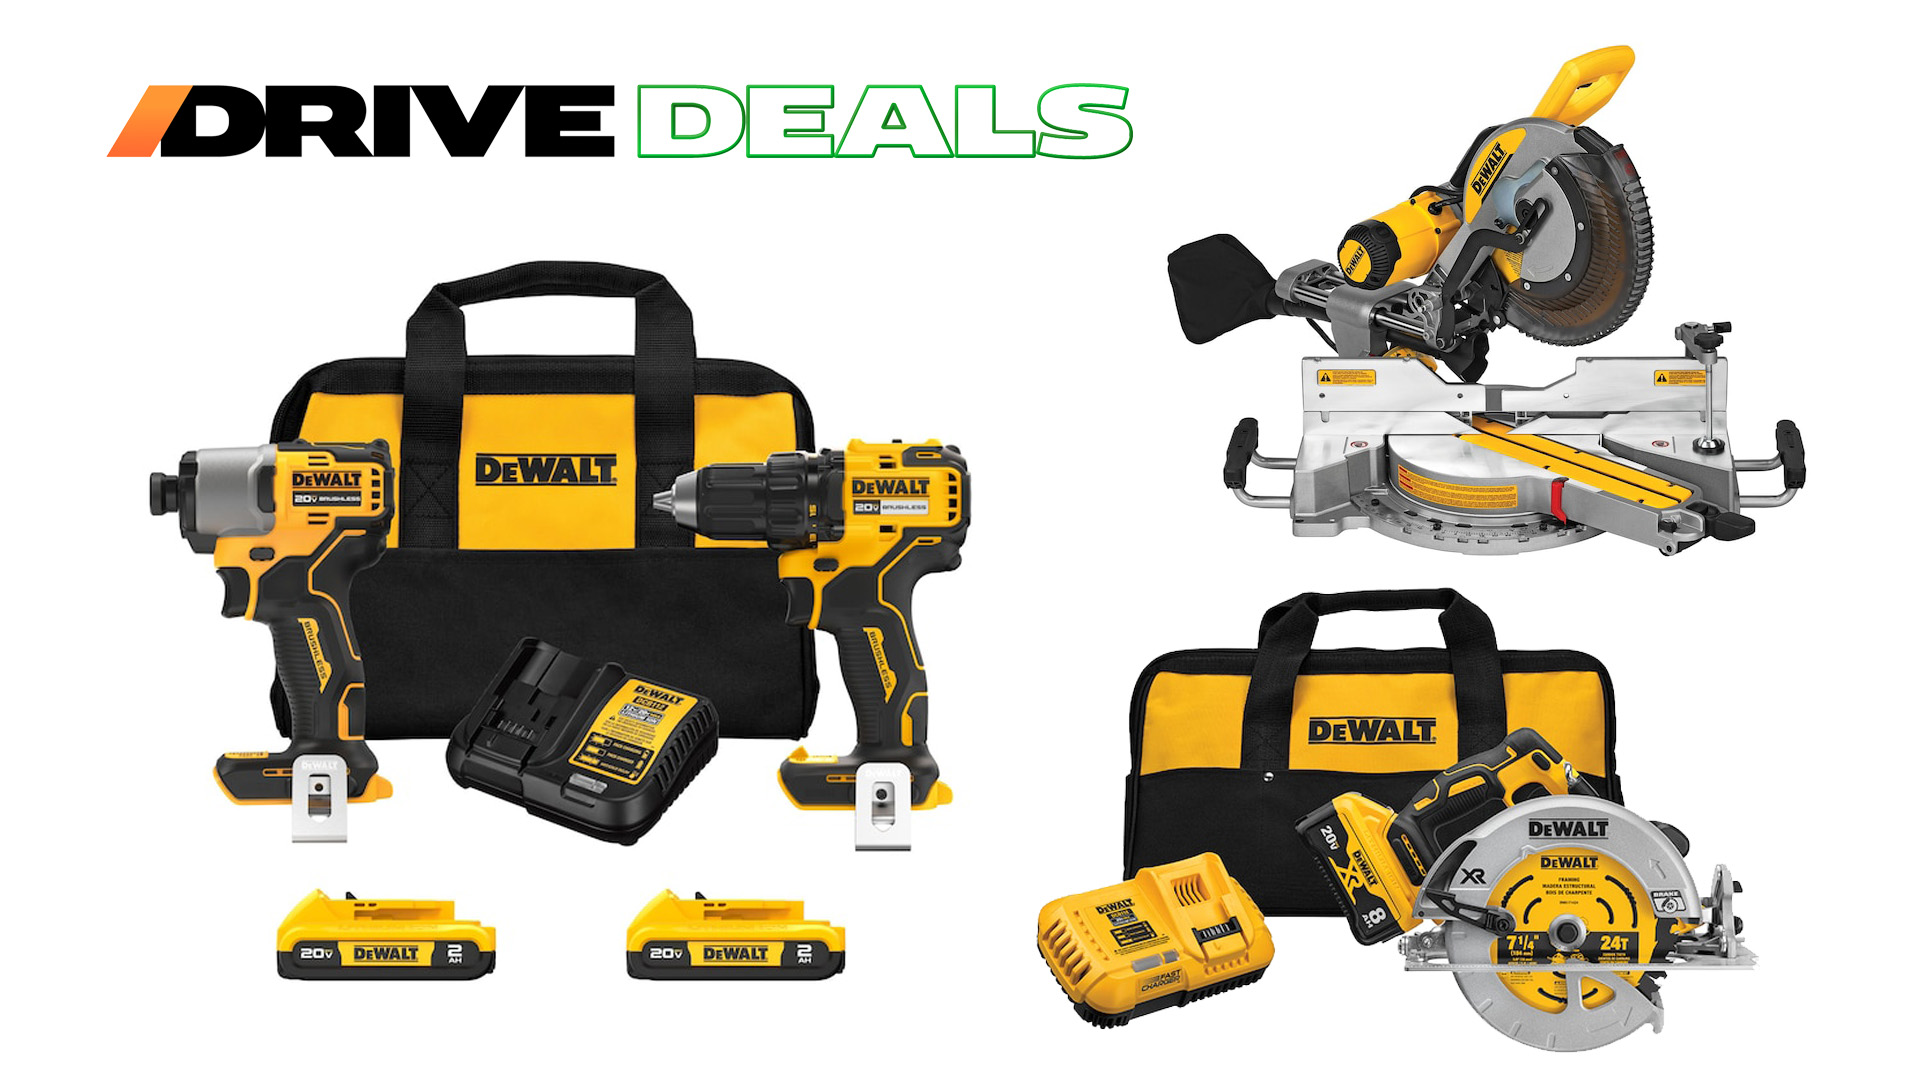 Snag One of these Amazing DeWalt Deals From Lowes